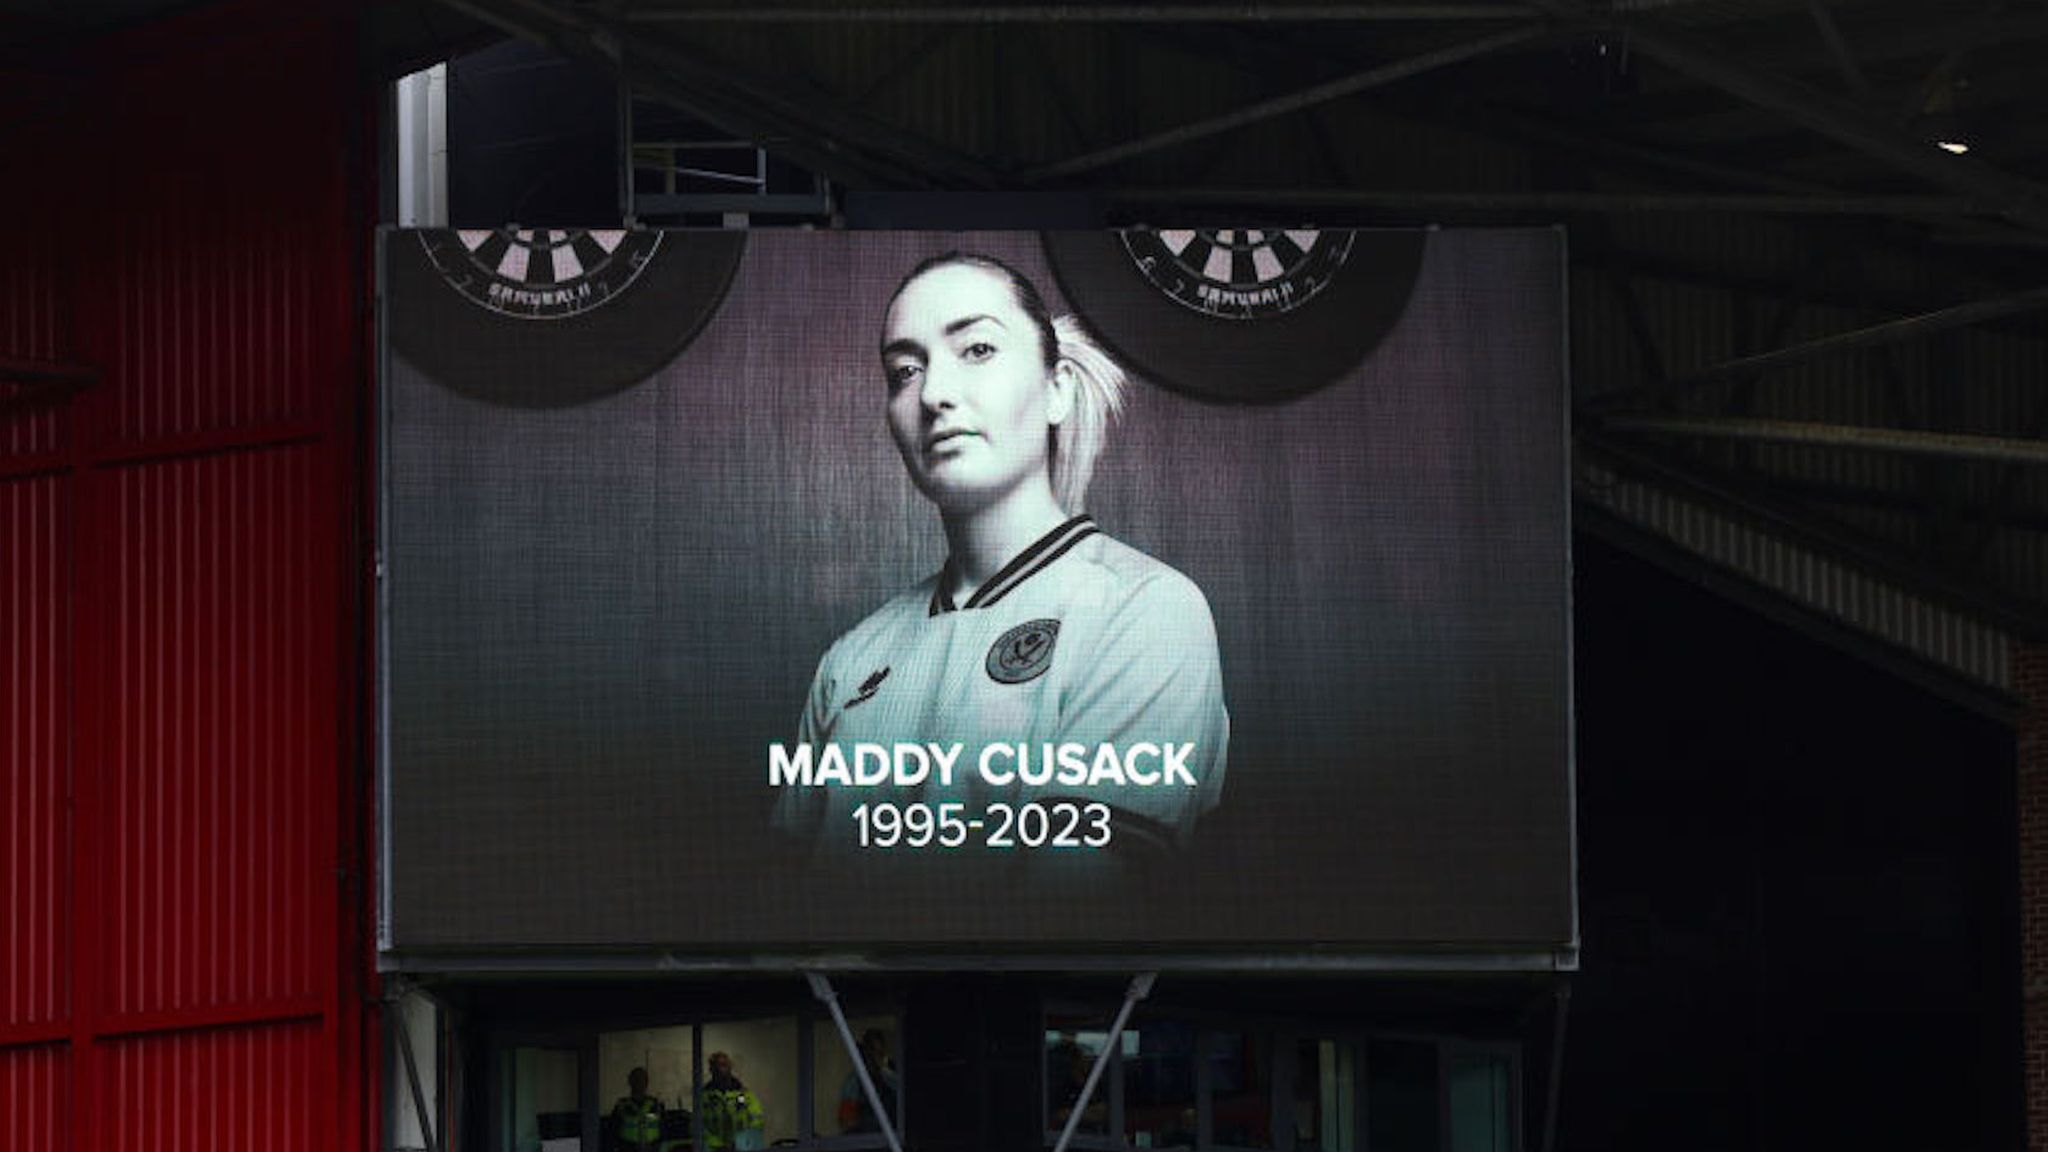 An image of Maddy Cusack with the words 'Maddy Cusack 1995-2023' is displayed on the big screen at Bramall Lane prior to Sheffield United men's Premier League match against Newcastle on 24 September